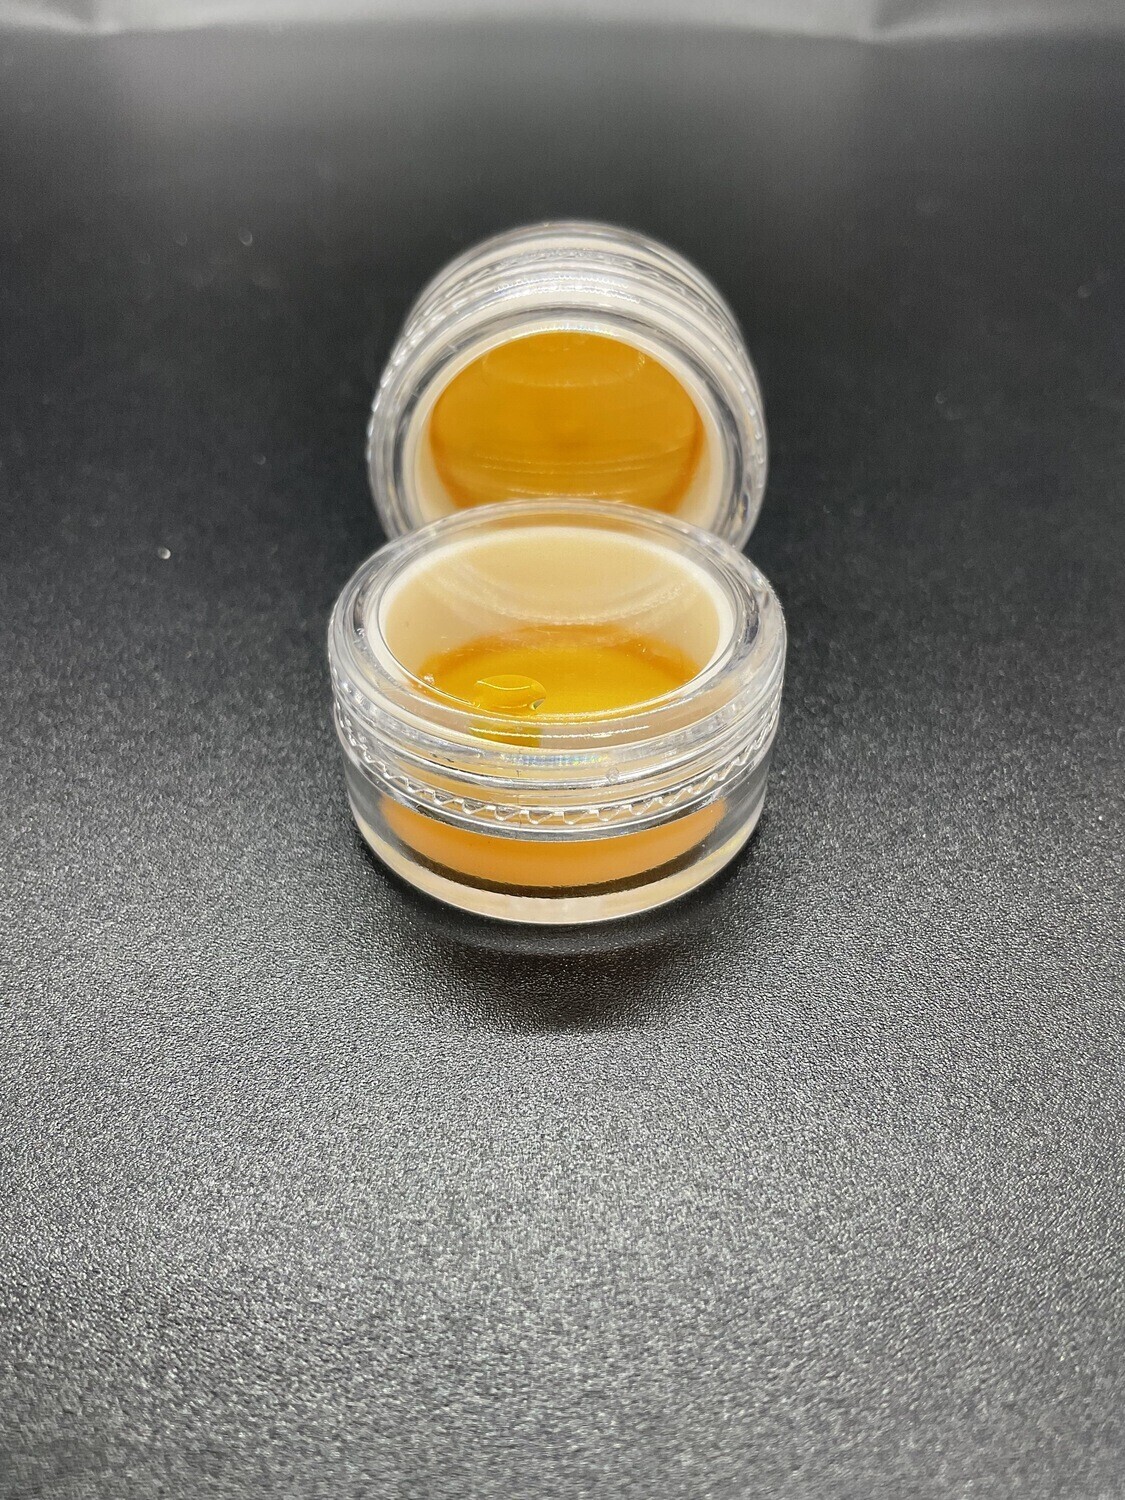 Wedding Cake Shatter Concentrate